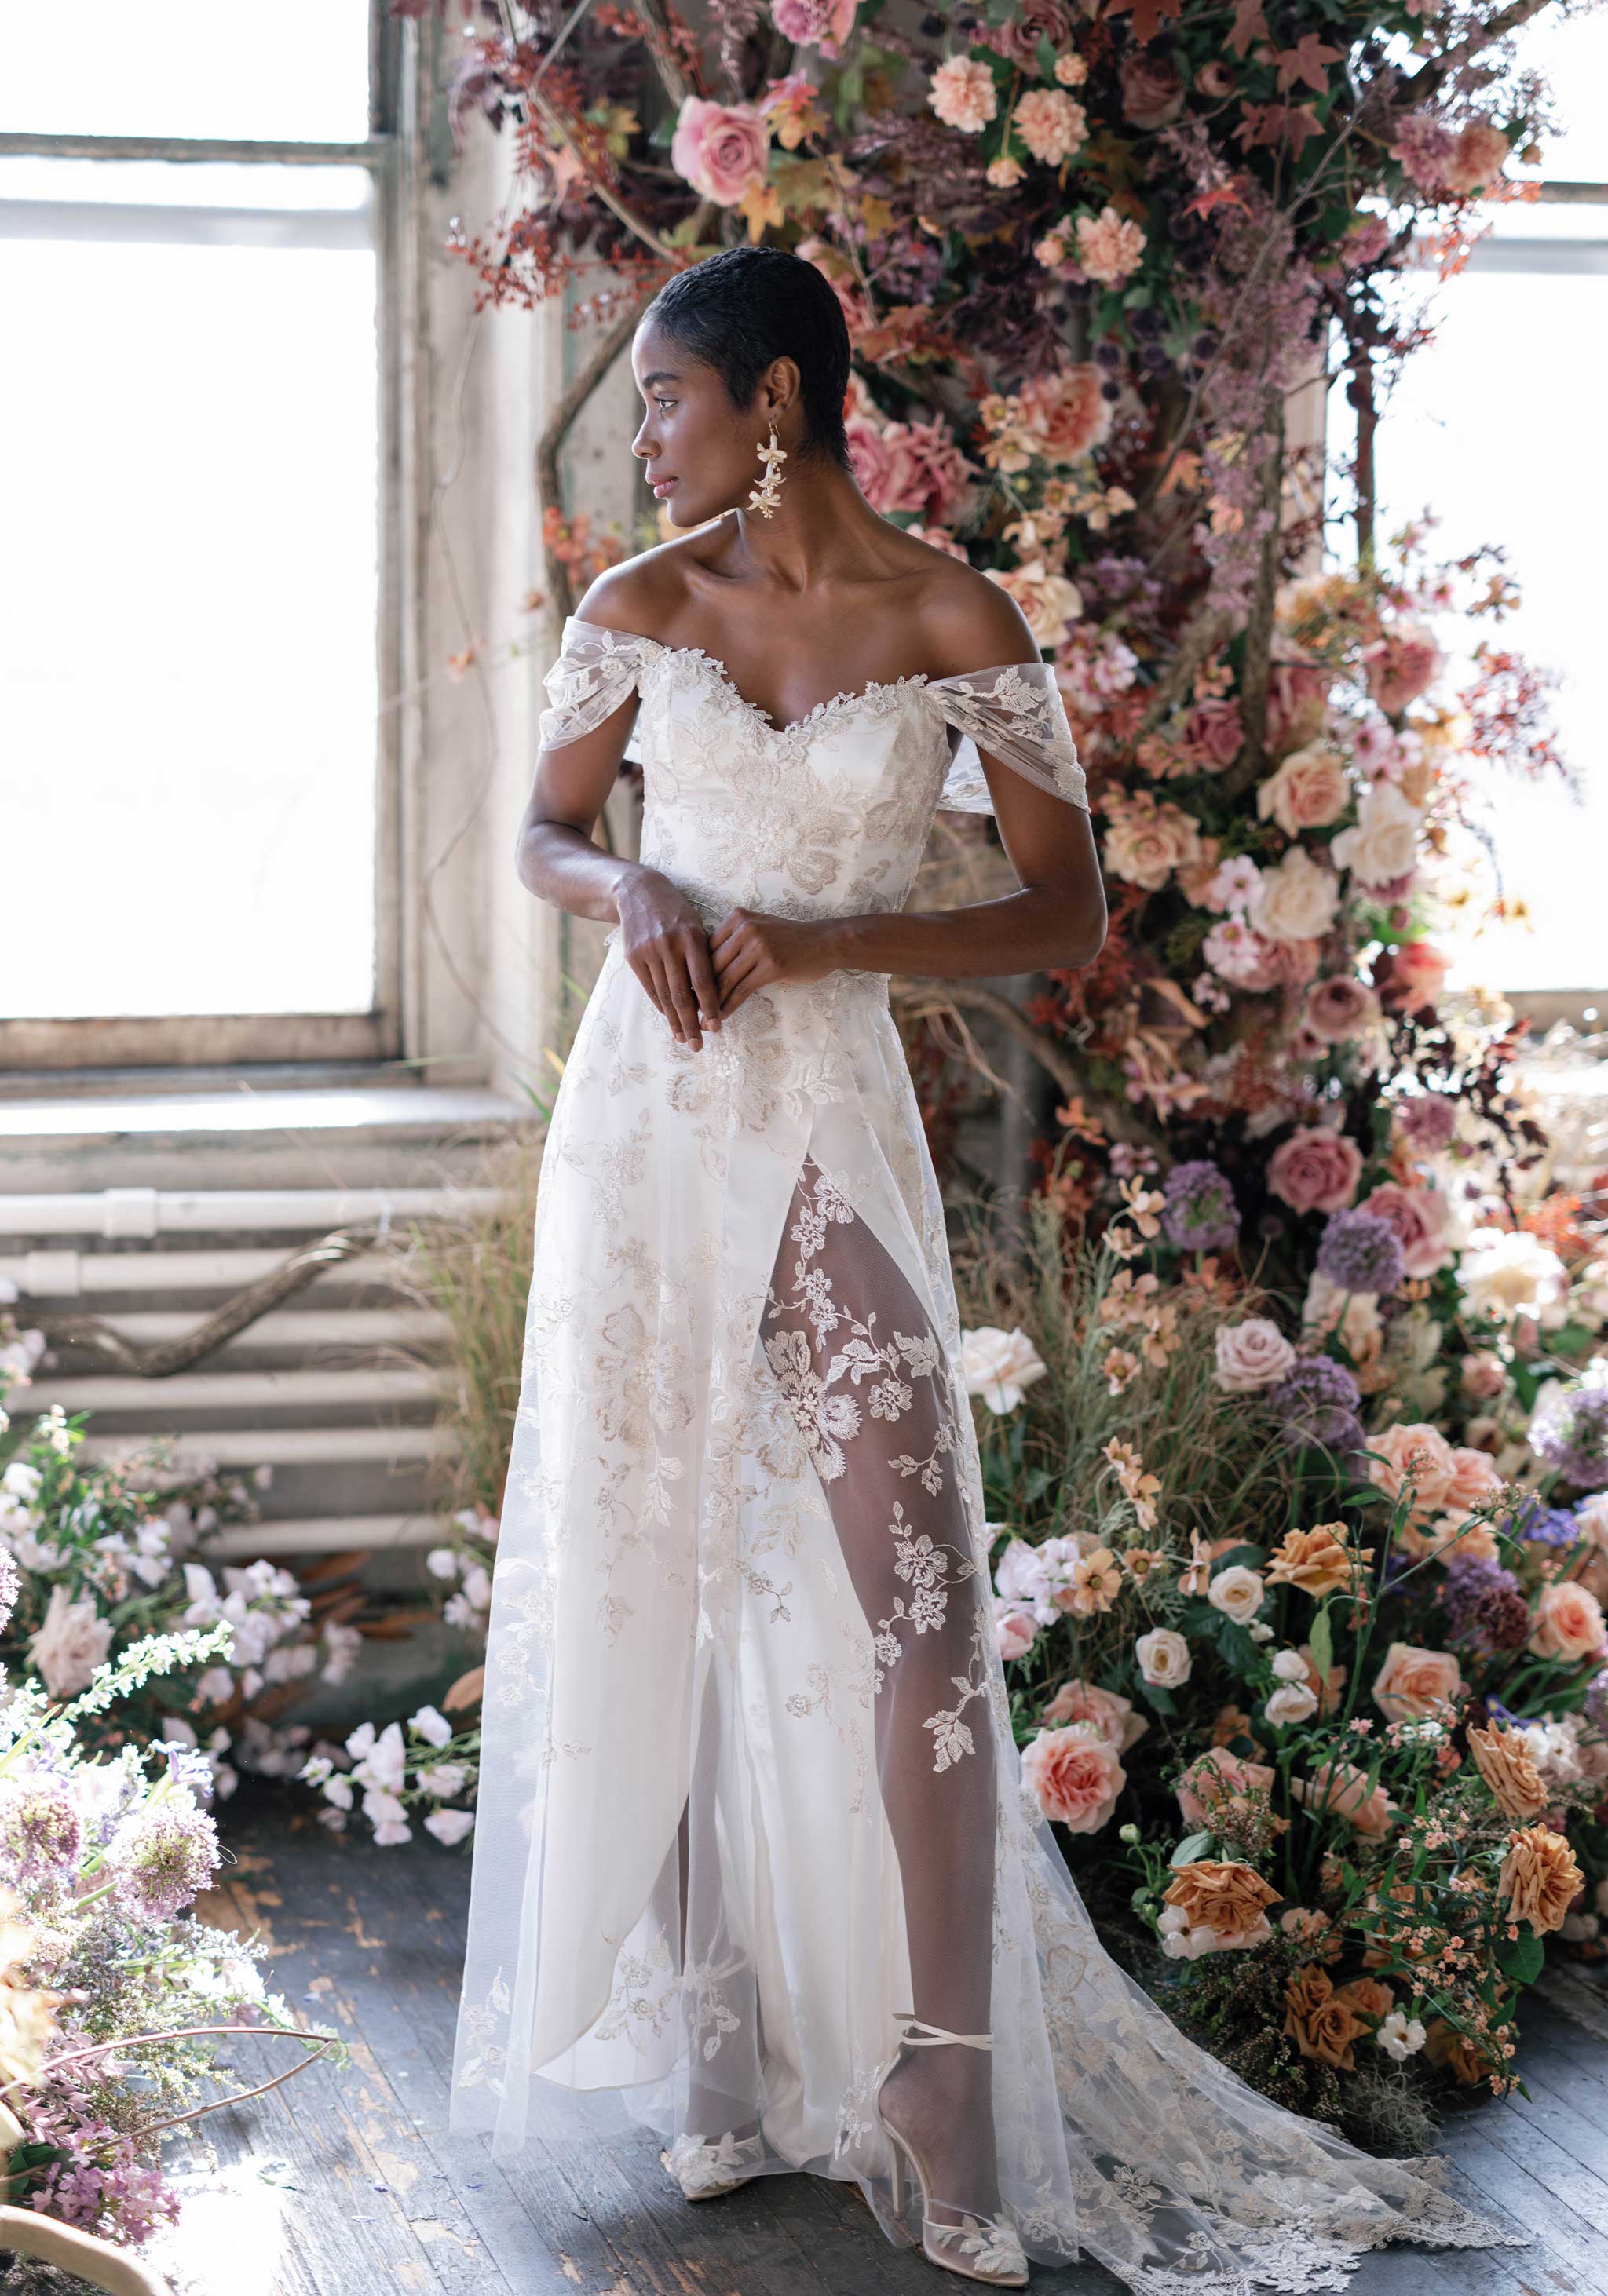 Breathtaking wedding dresses we can't get enough : Long Sleeve 3D Floral